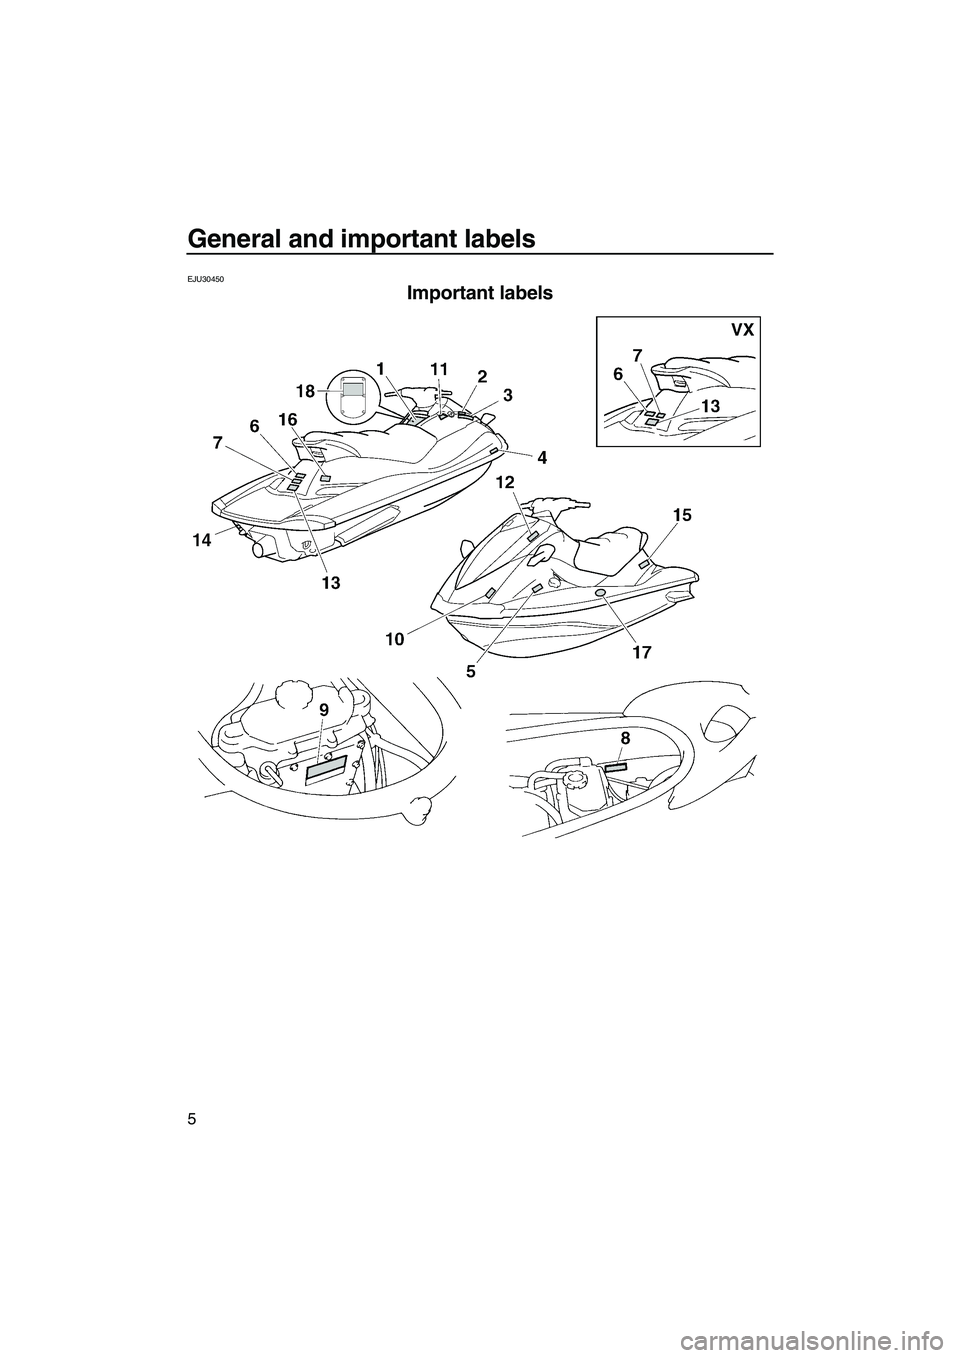 YAMAHA VX CRUISER 2007 User Guide General and important labels
5
EJU30450
Important labels 
UF1K72E0.book  Page 5  Wednesday, August 2, 2006  10:43 AM 